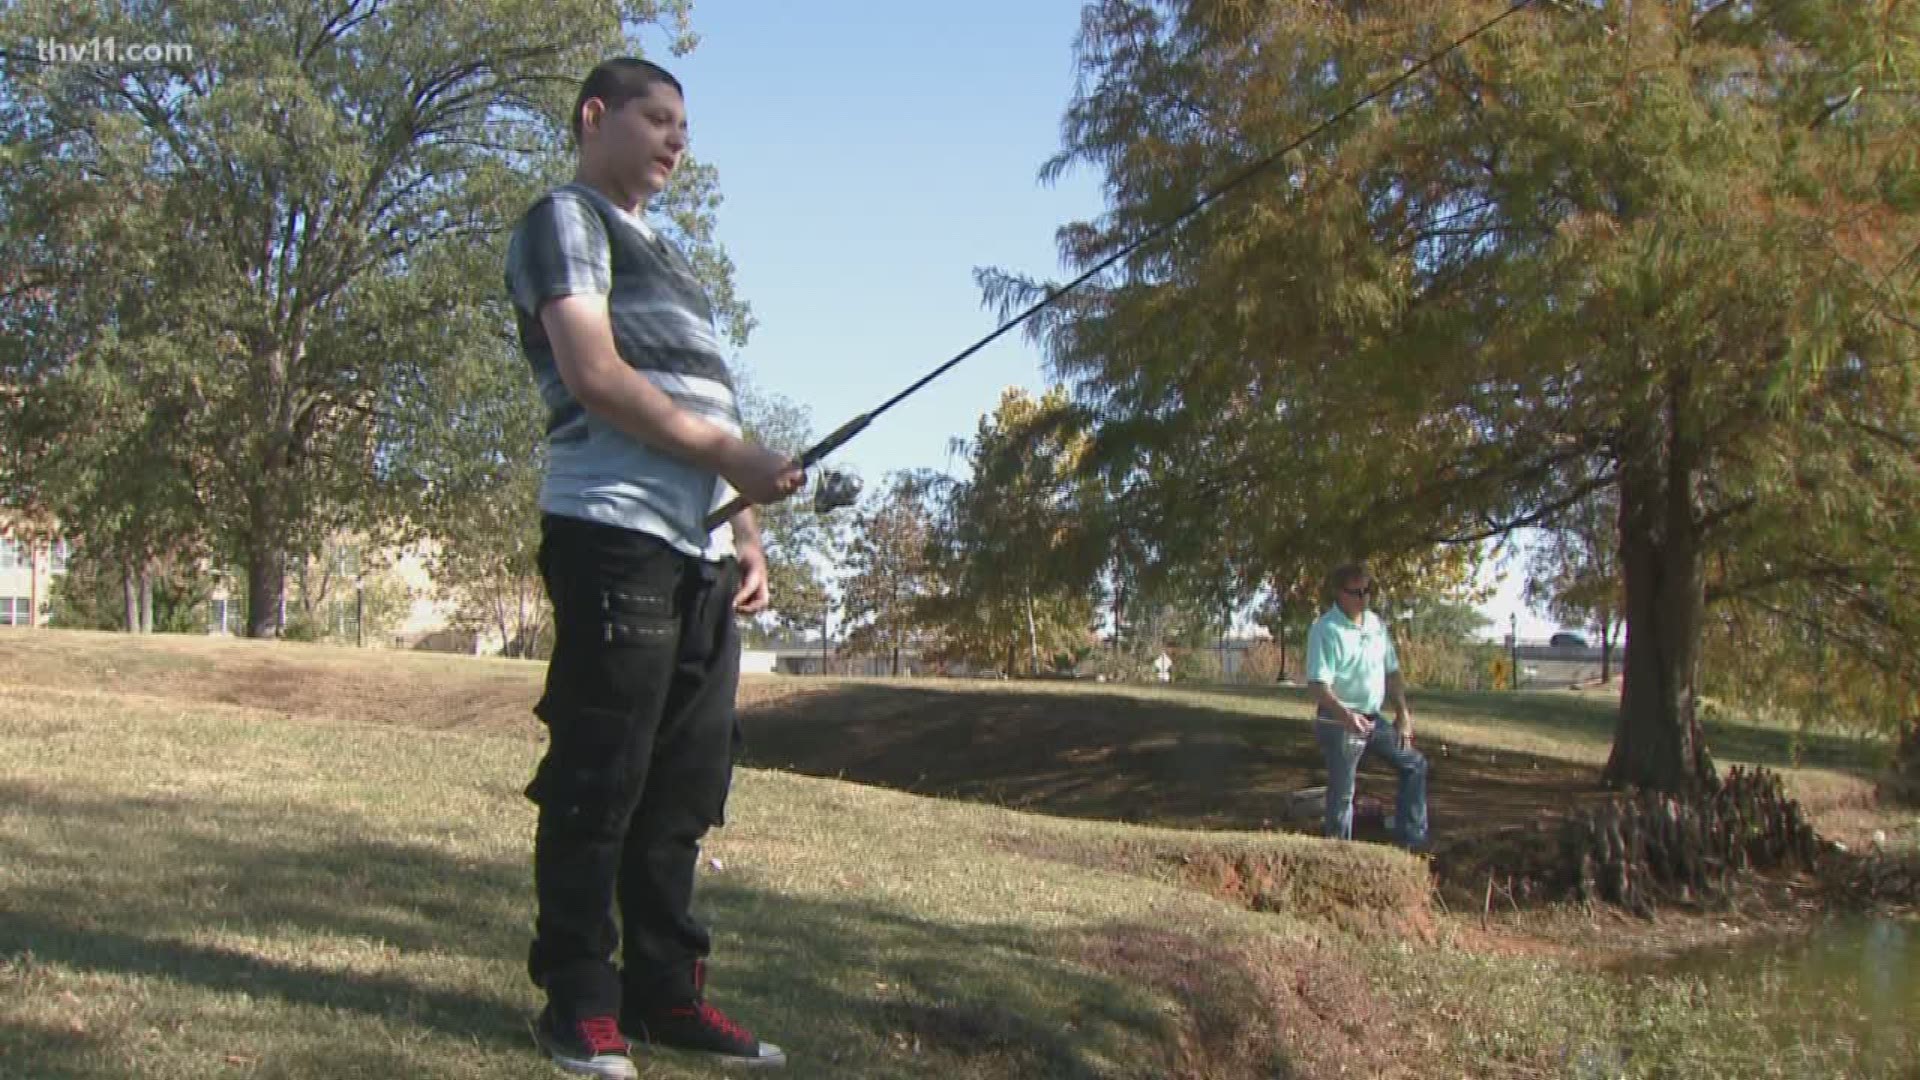 Tristan is a 14-year-old who has been in foster care for three years. He went fishing as he talked about the kind of family he hopes to have one day.